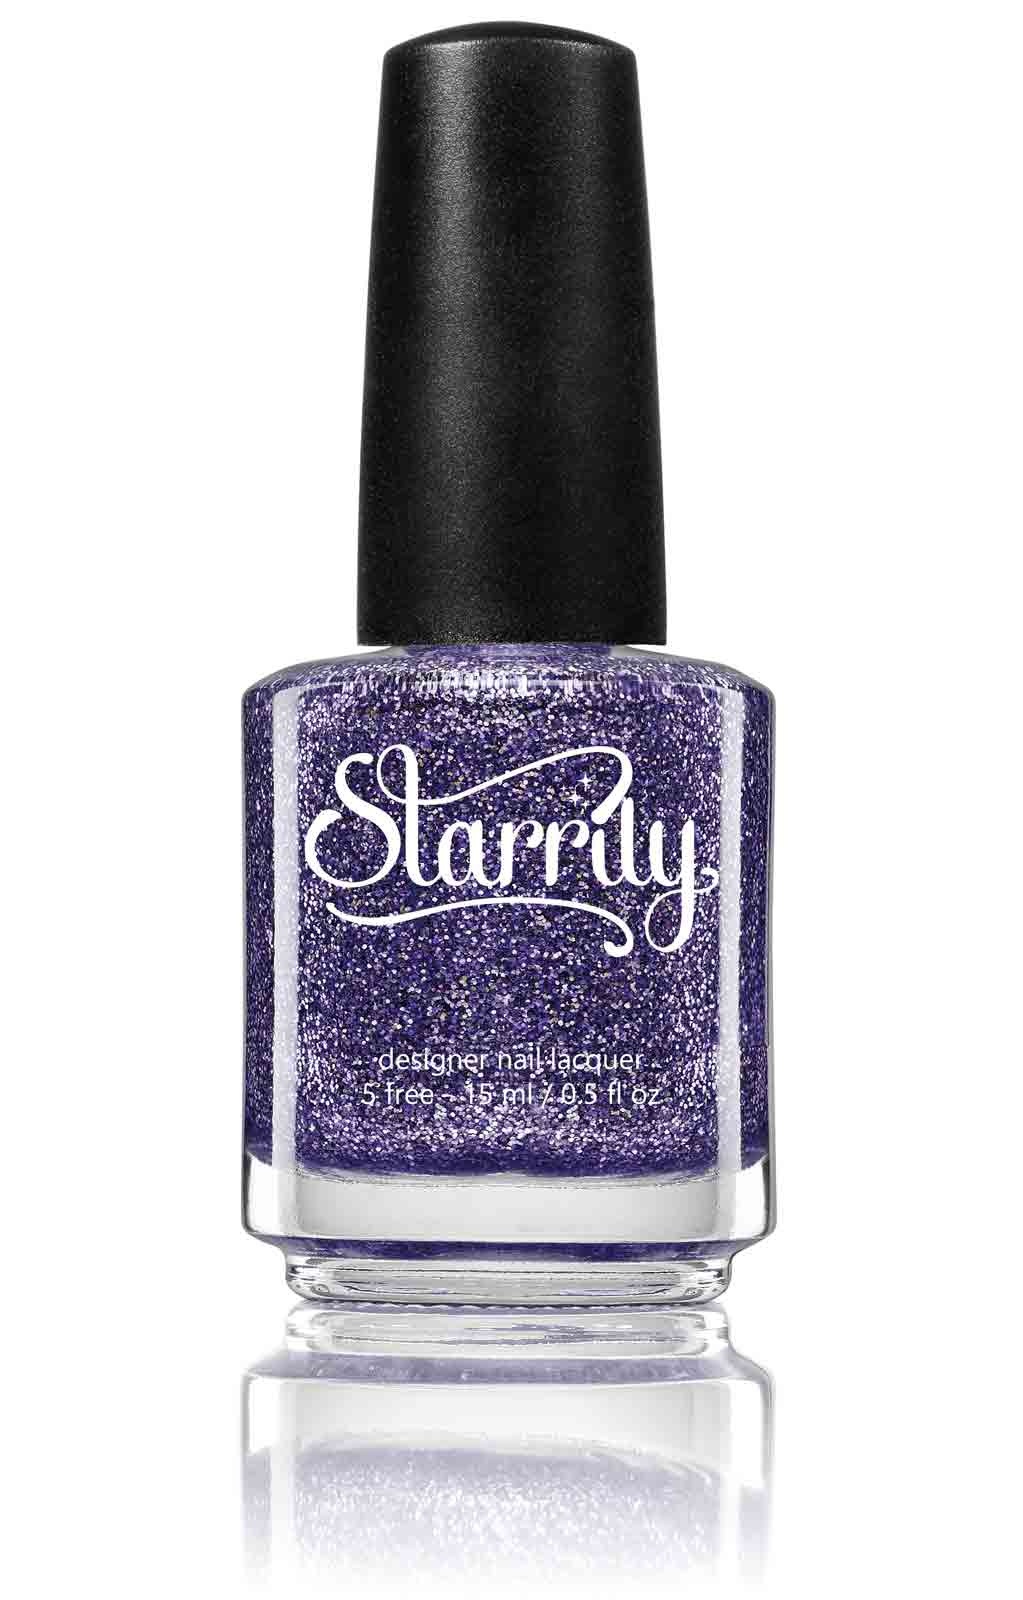 Damsel nail polish contains extra sparkly lilac light purple holographic glitter